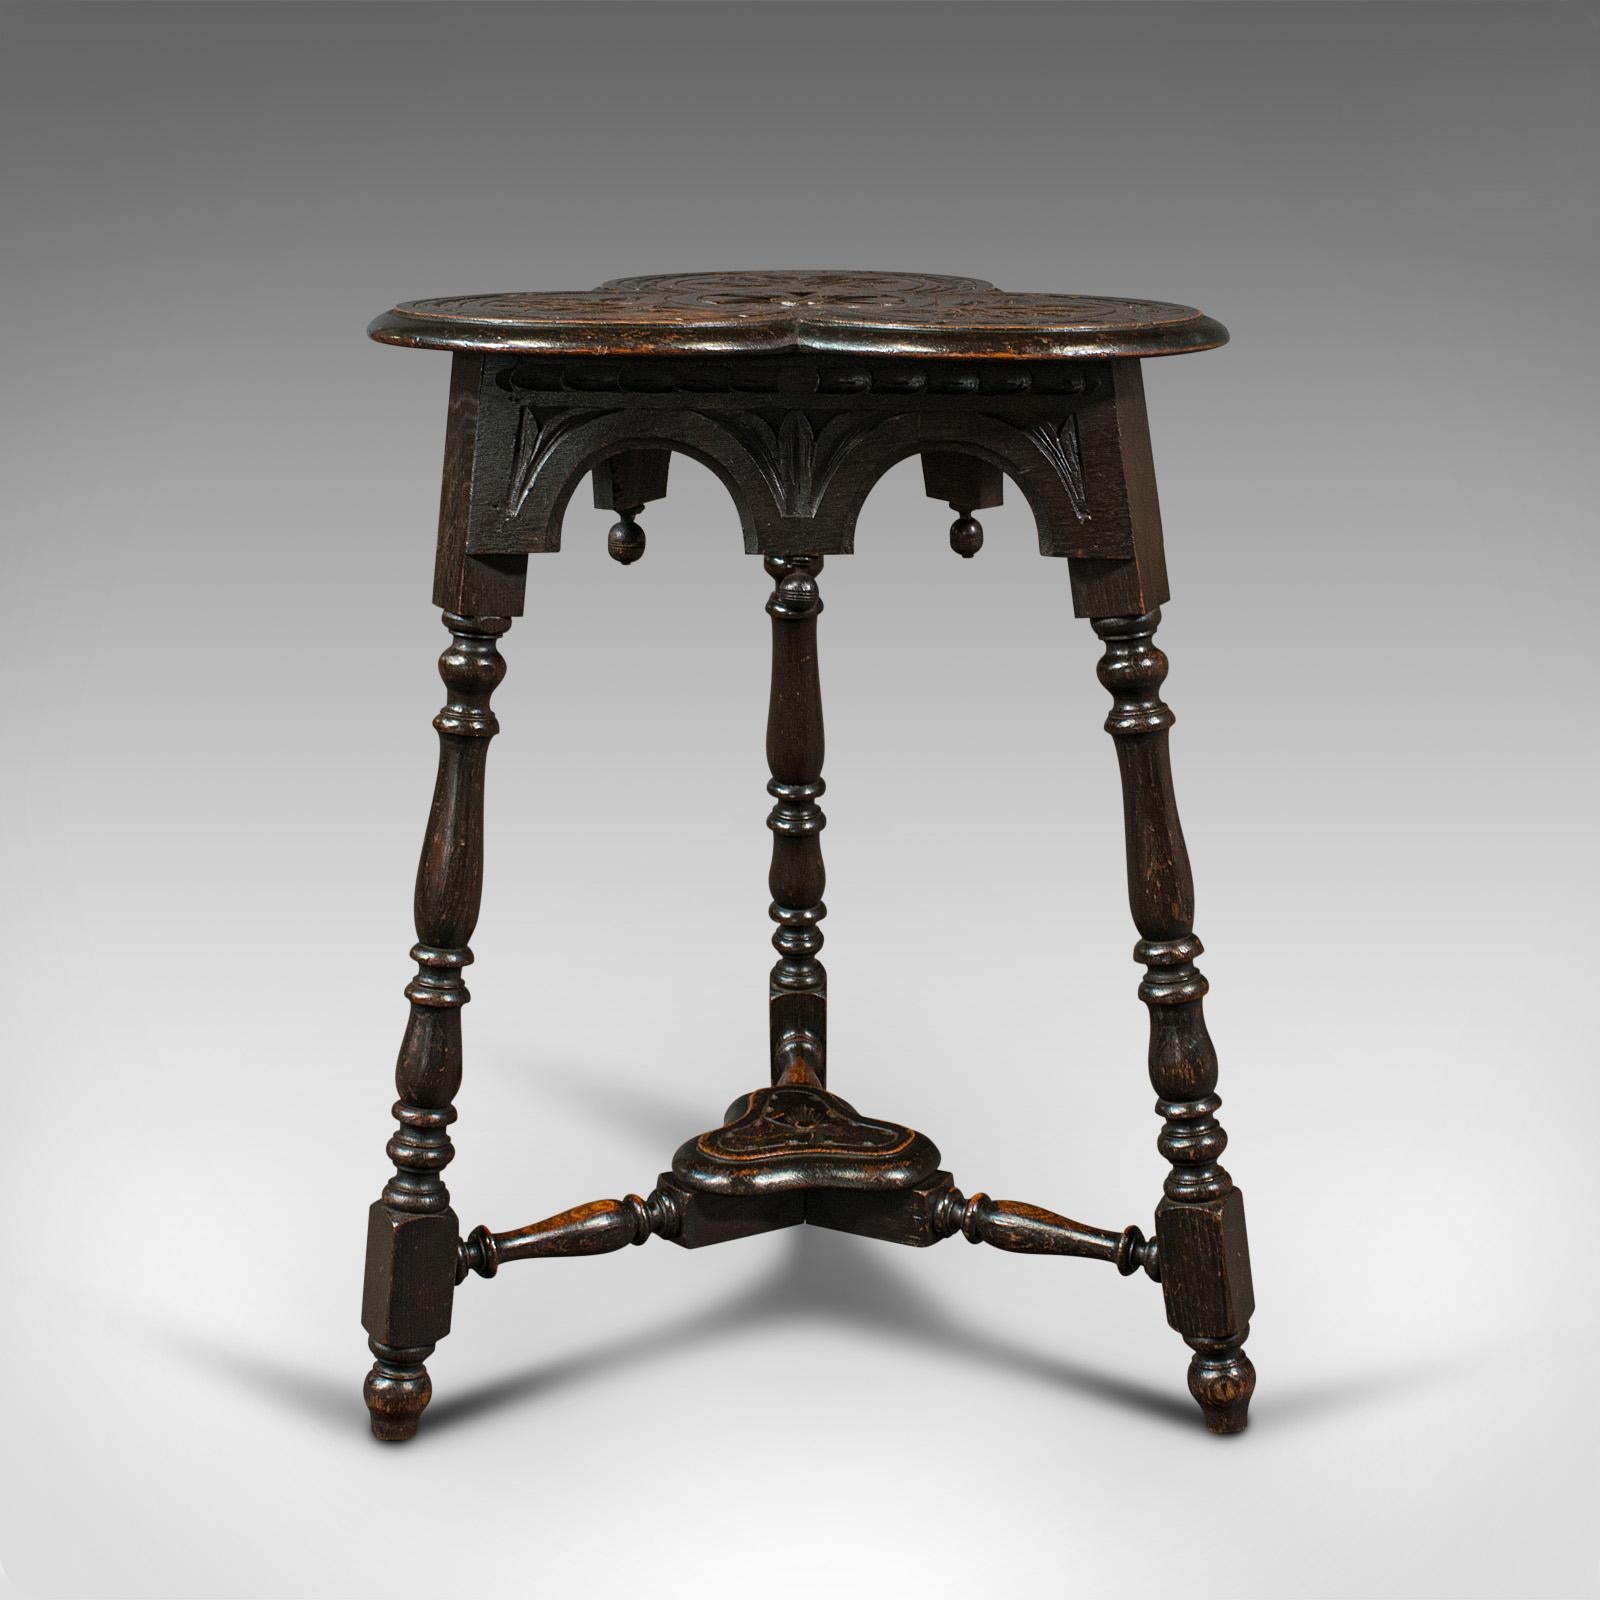 This is an antique trefoil side table. A Scottish, oak lamp or wine table with Aesthetic period taste, dating to the Victorian period, circa 1880.

Highly distinctive table with great tonality and detail
Displays a desirable aged patina